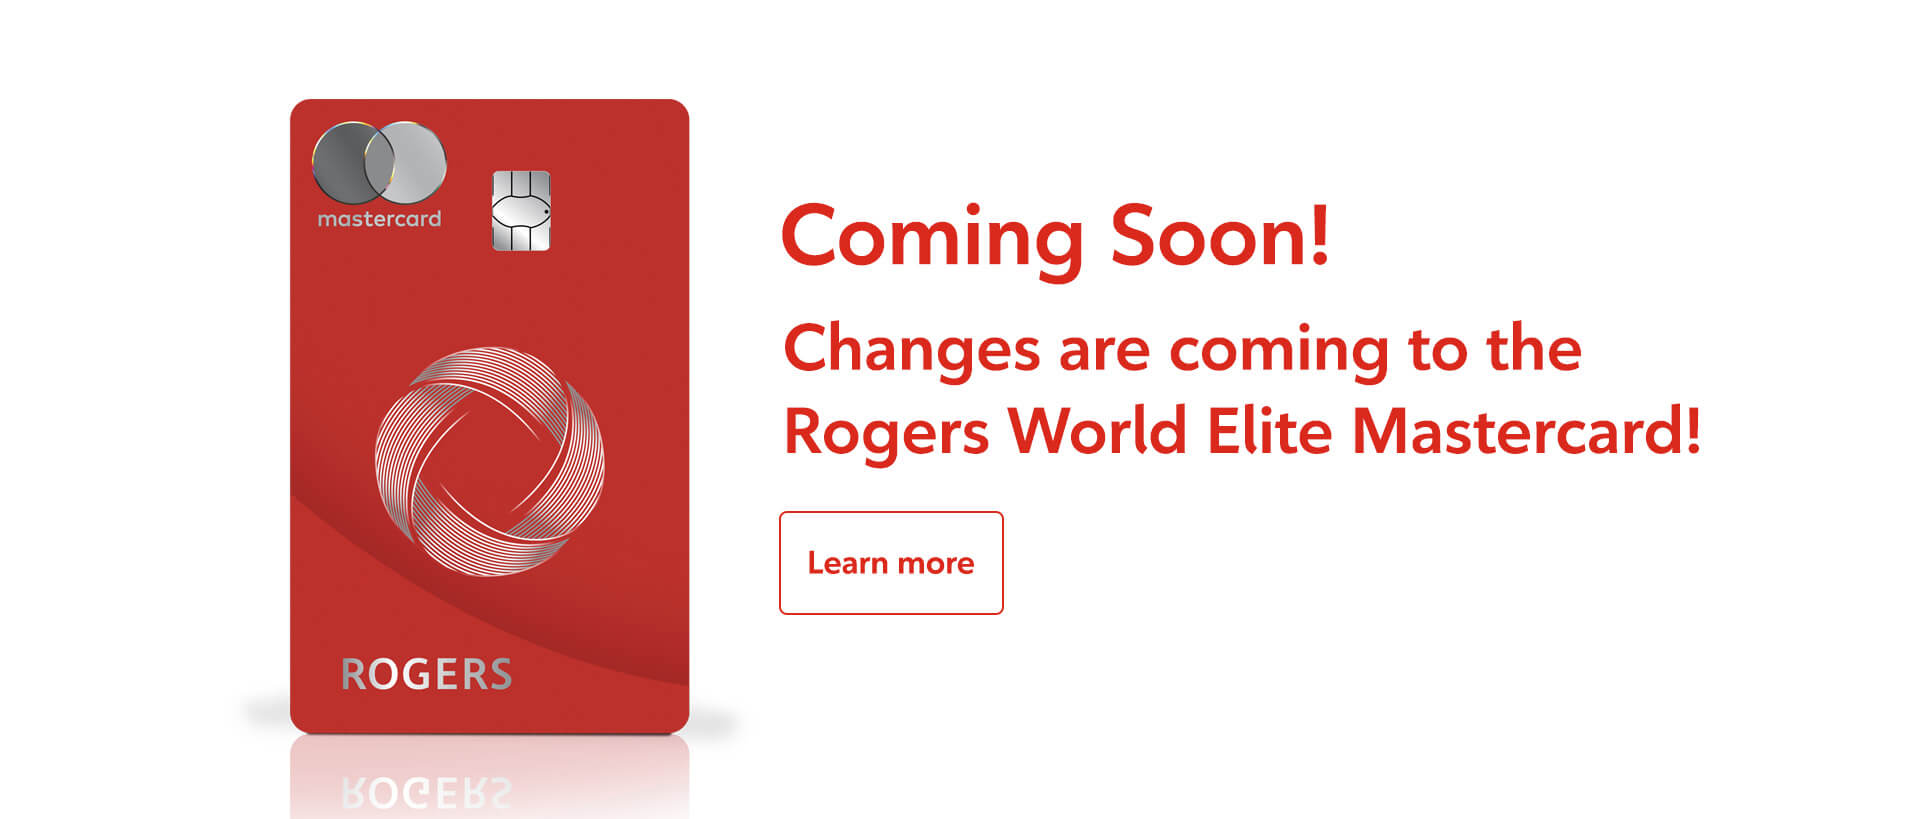 Learn more about new changes coming to the Rogers World Elite Mastercard